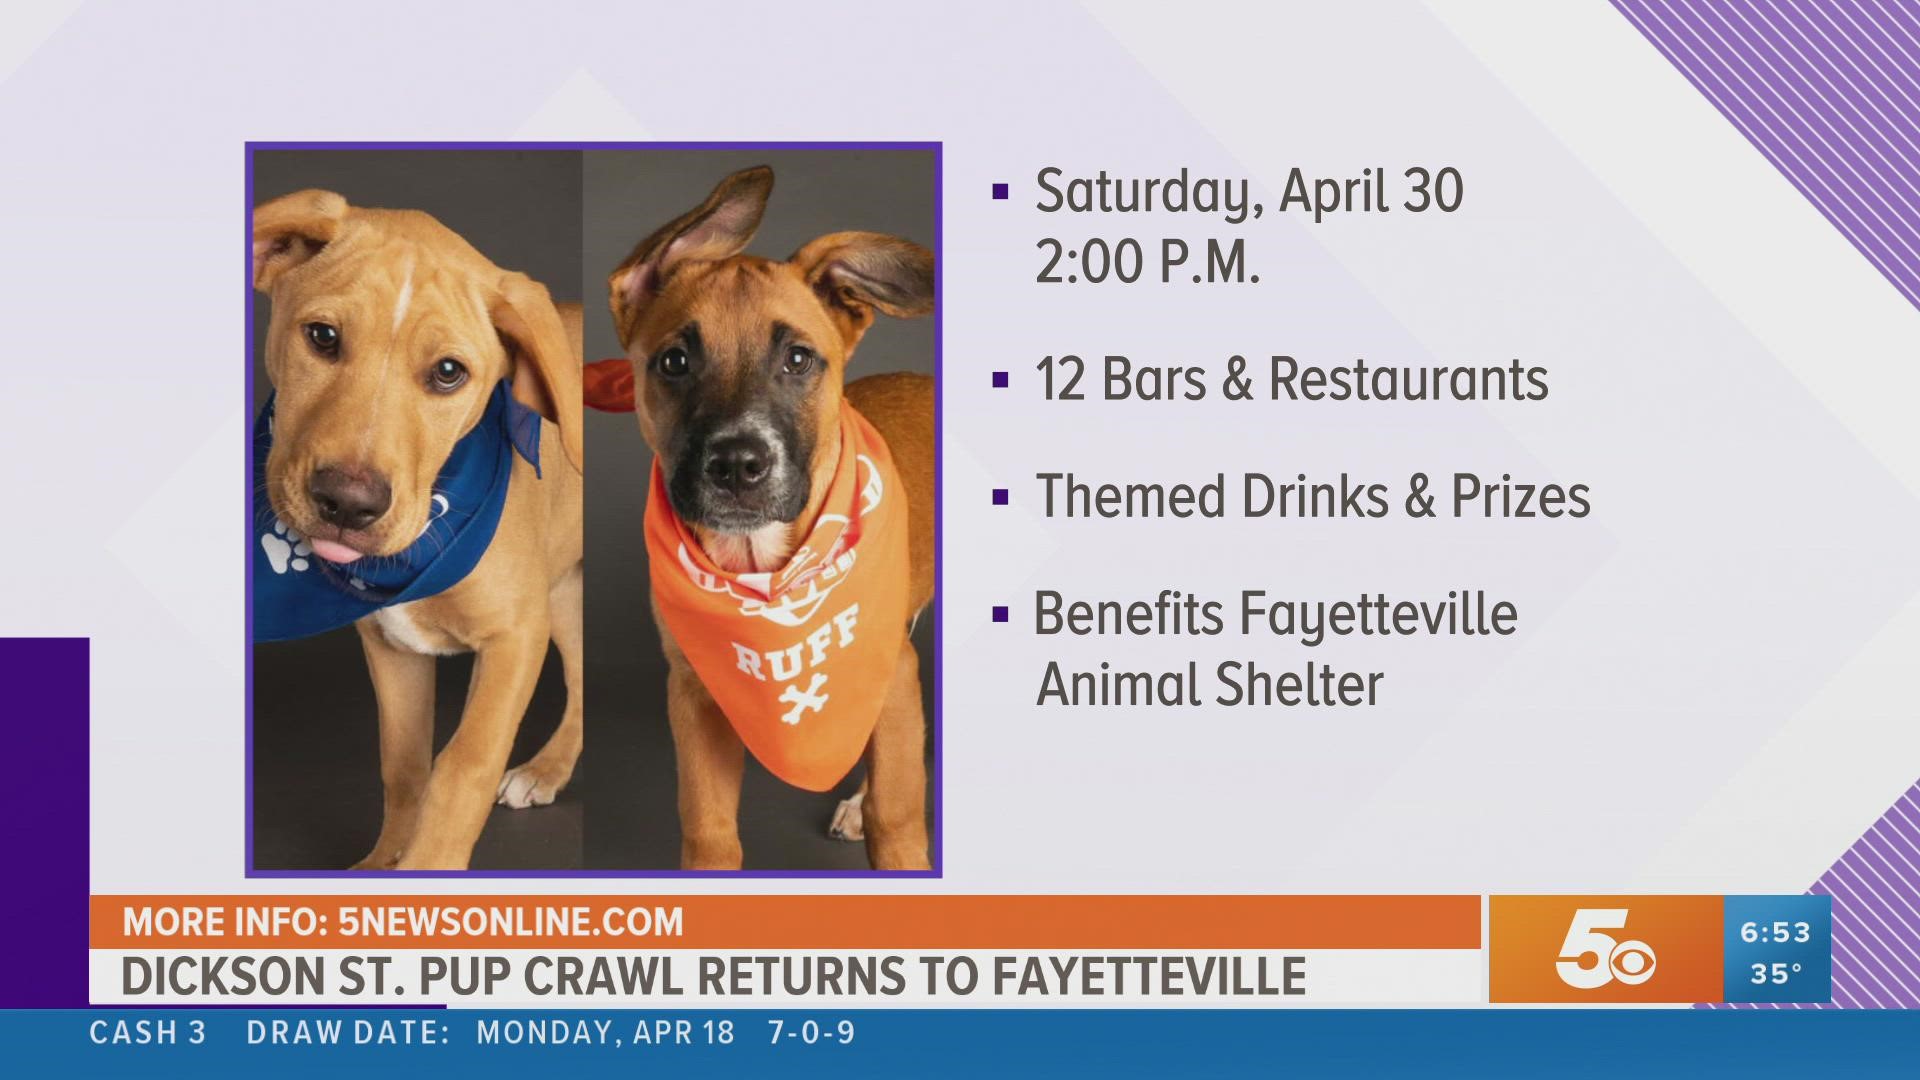 Get ready for some tail-wagging fun and sign up for the 2022 Dickson Street Pup Crawl. https://bit.ly/3vqhFpu